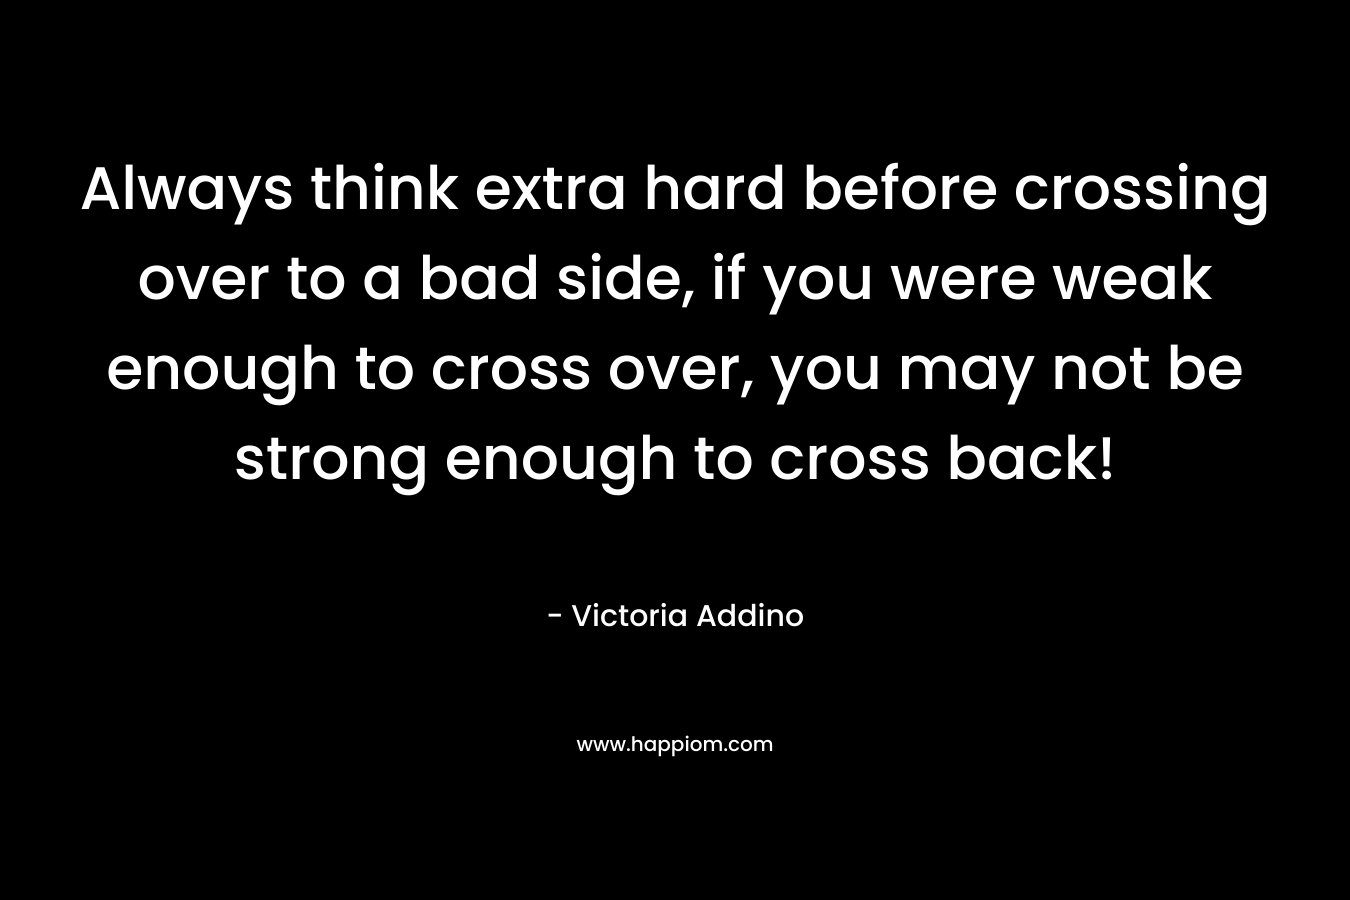 Always think extra hard before crossing over to a bad side, if you were weak enough to cross over, you may not be strong enough to cross back! – Victoria Addino